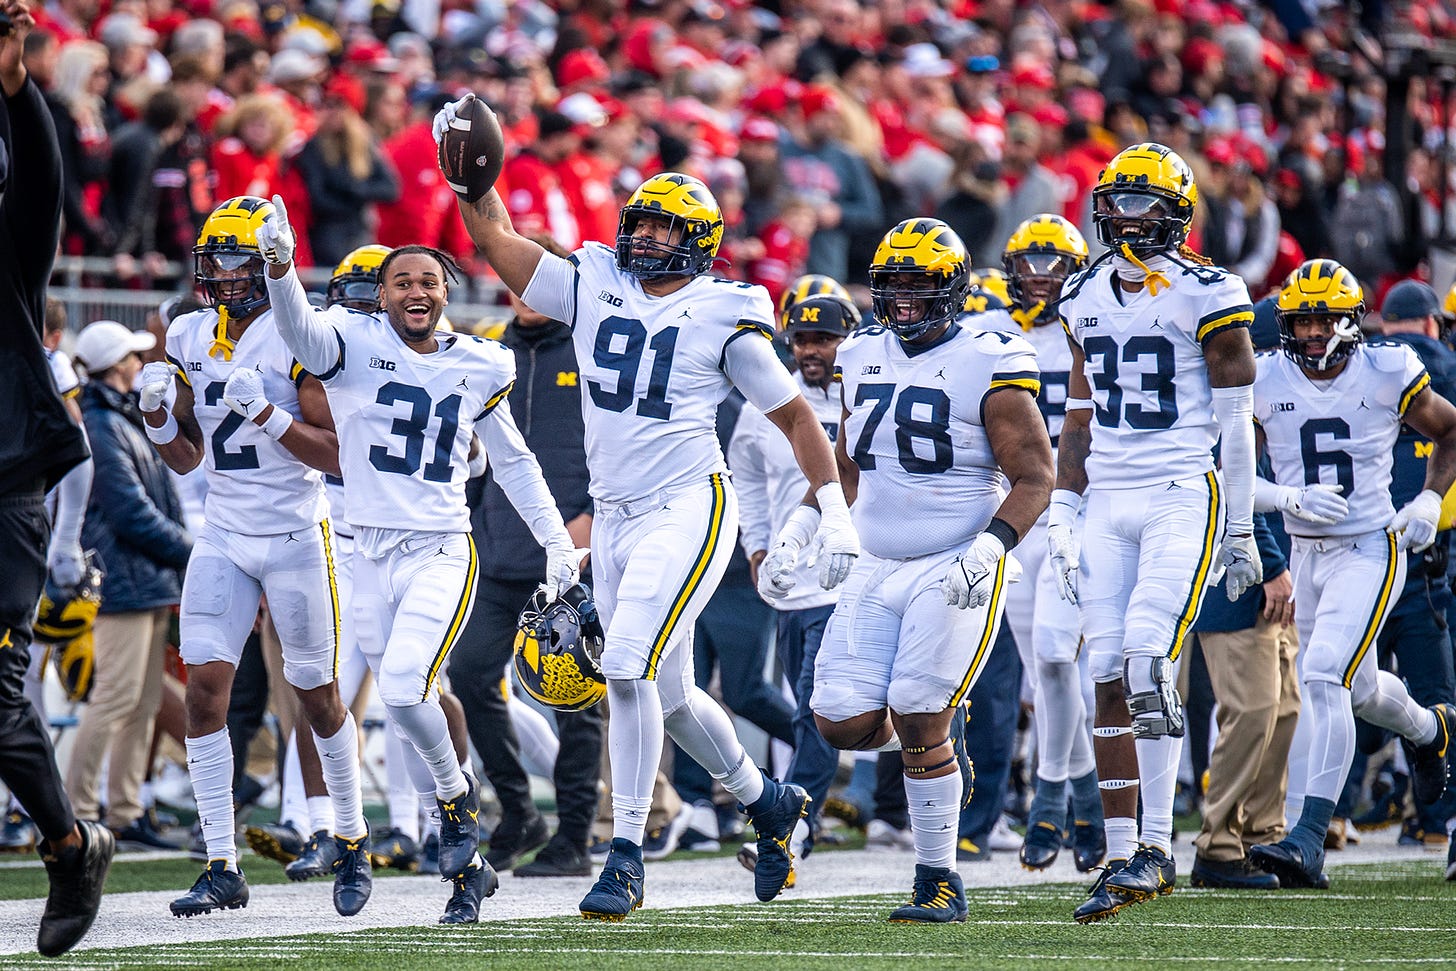 SportsMonday: Michigan is a football school. Don't forget it